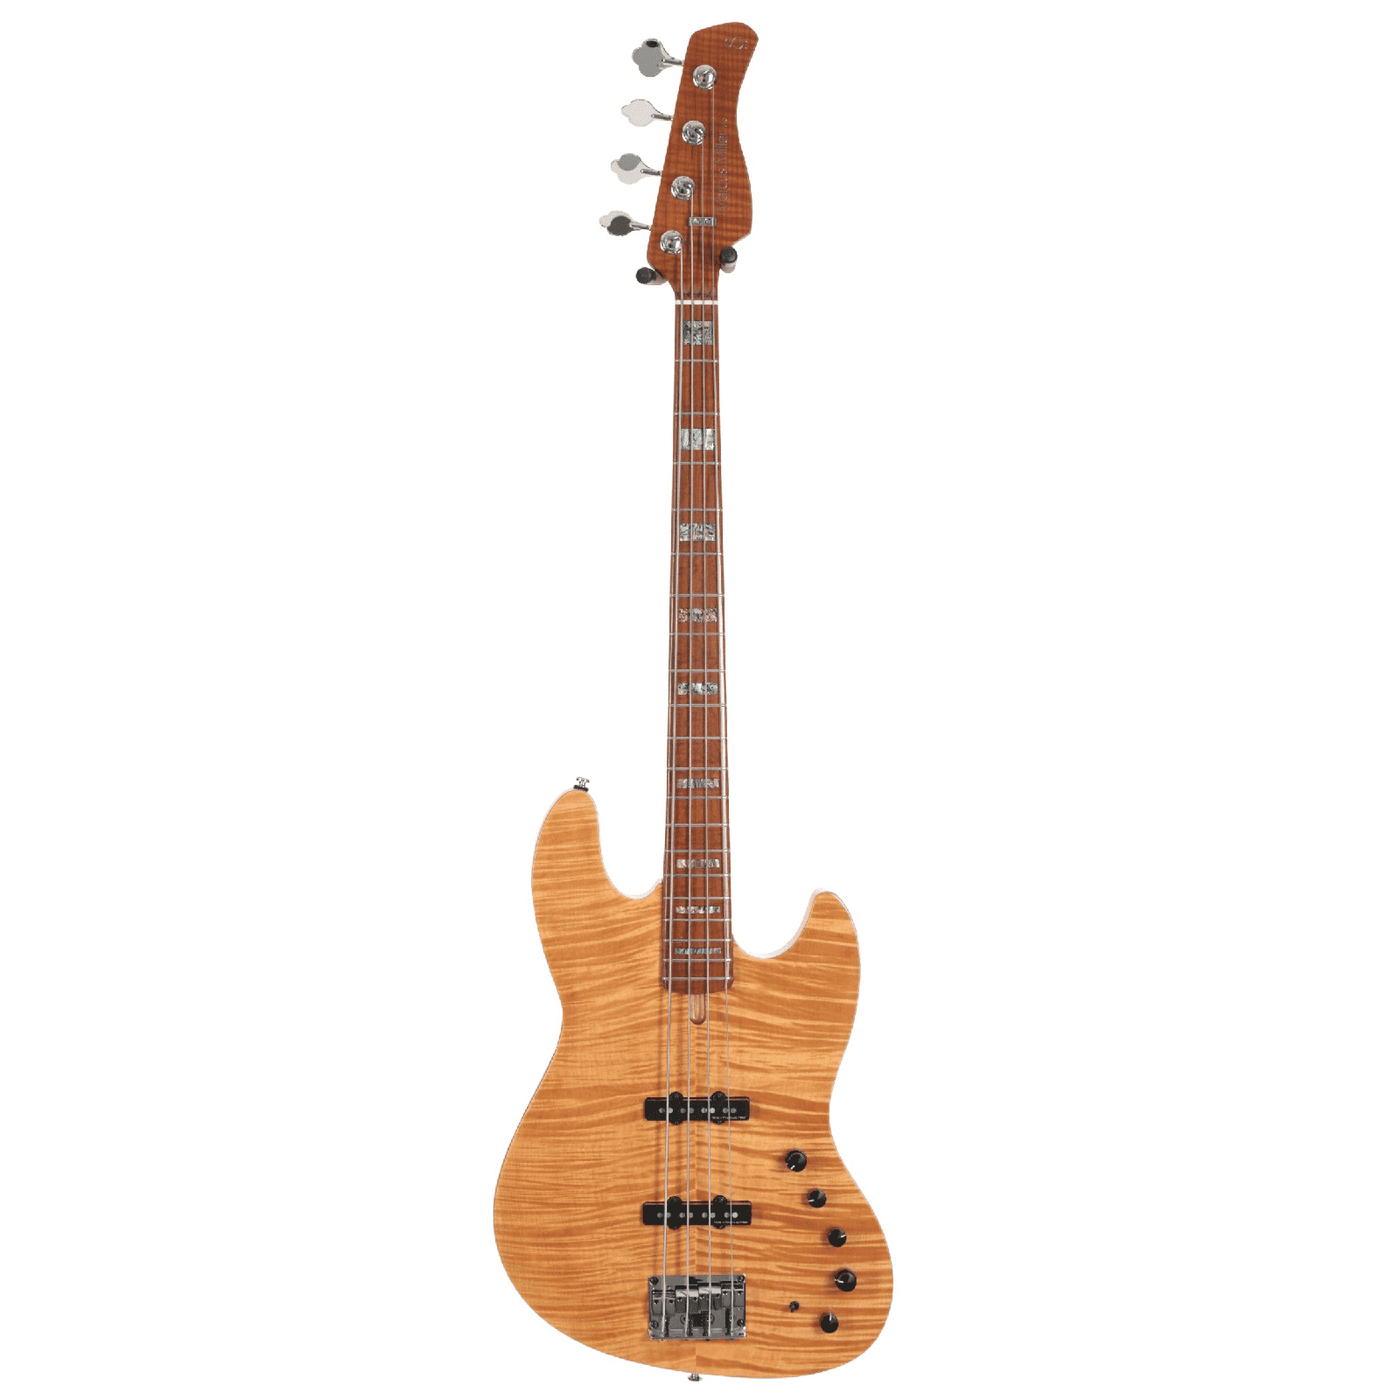 Sire V10 Natural (2nd Gen) - A high-grade model in the Sire Marcus Miller series. The Sire V10 sets the V-series in another level of detail, playability, and comfort. With a roasted flame maple C-shaped neck and a rolled edge fretboard combined with Marcu